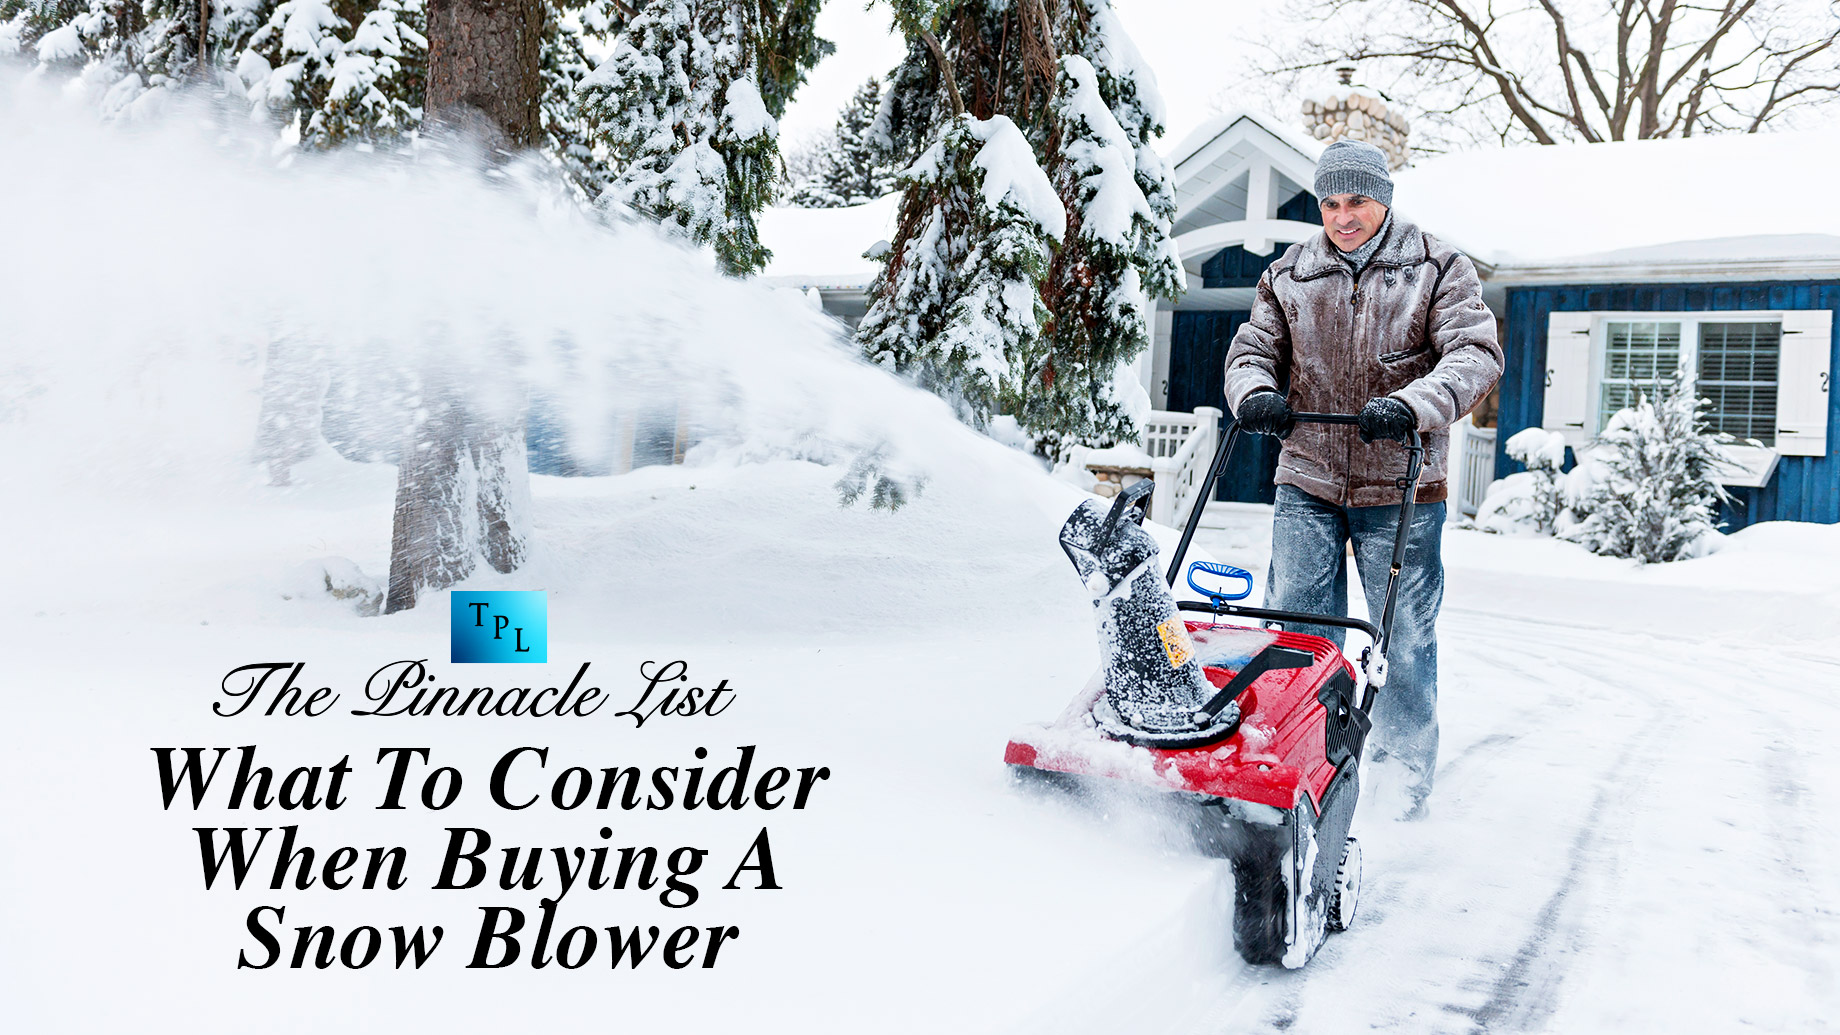 What To Consider When Buying A Snow Blower